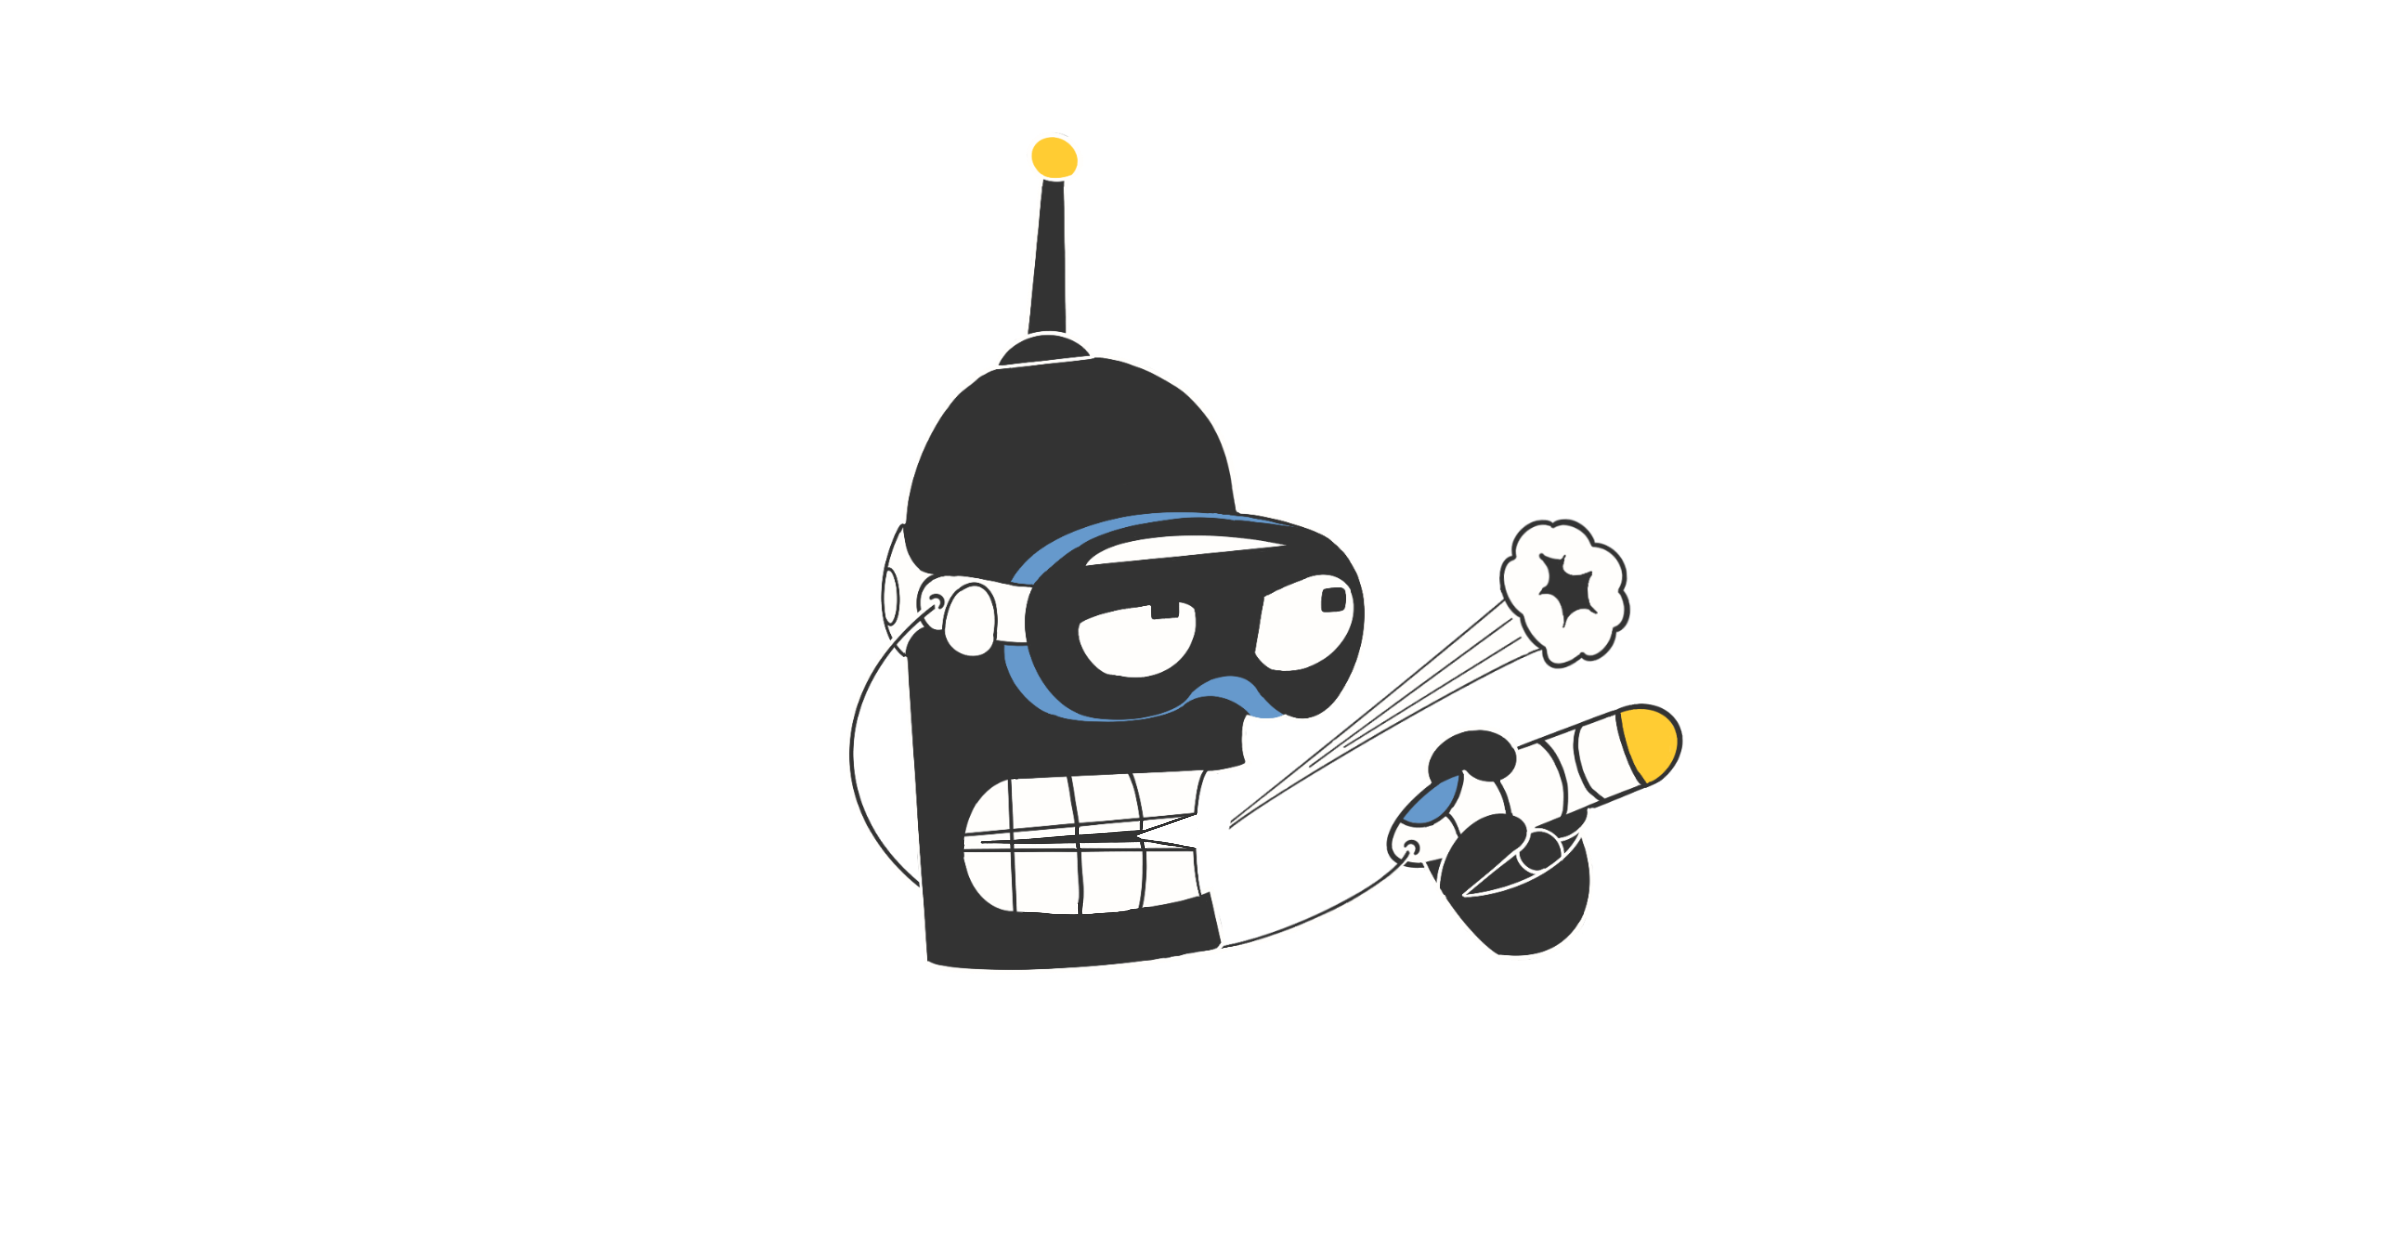 to bender — means to twist, shape, or manipulate something, often in a creative or artistic way, it can refer to the act of bending or contorting an object physically or metaphorically